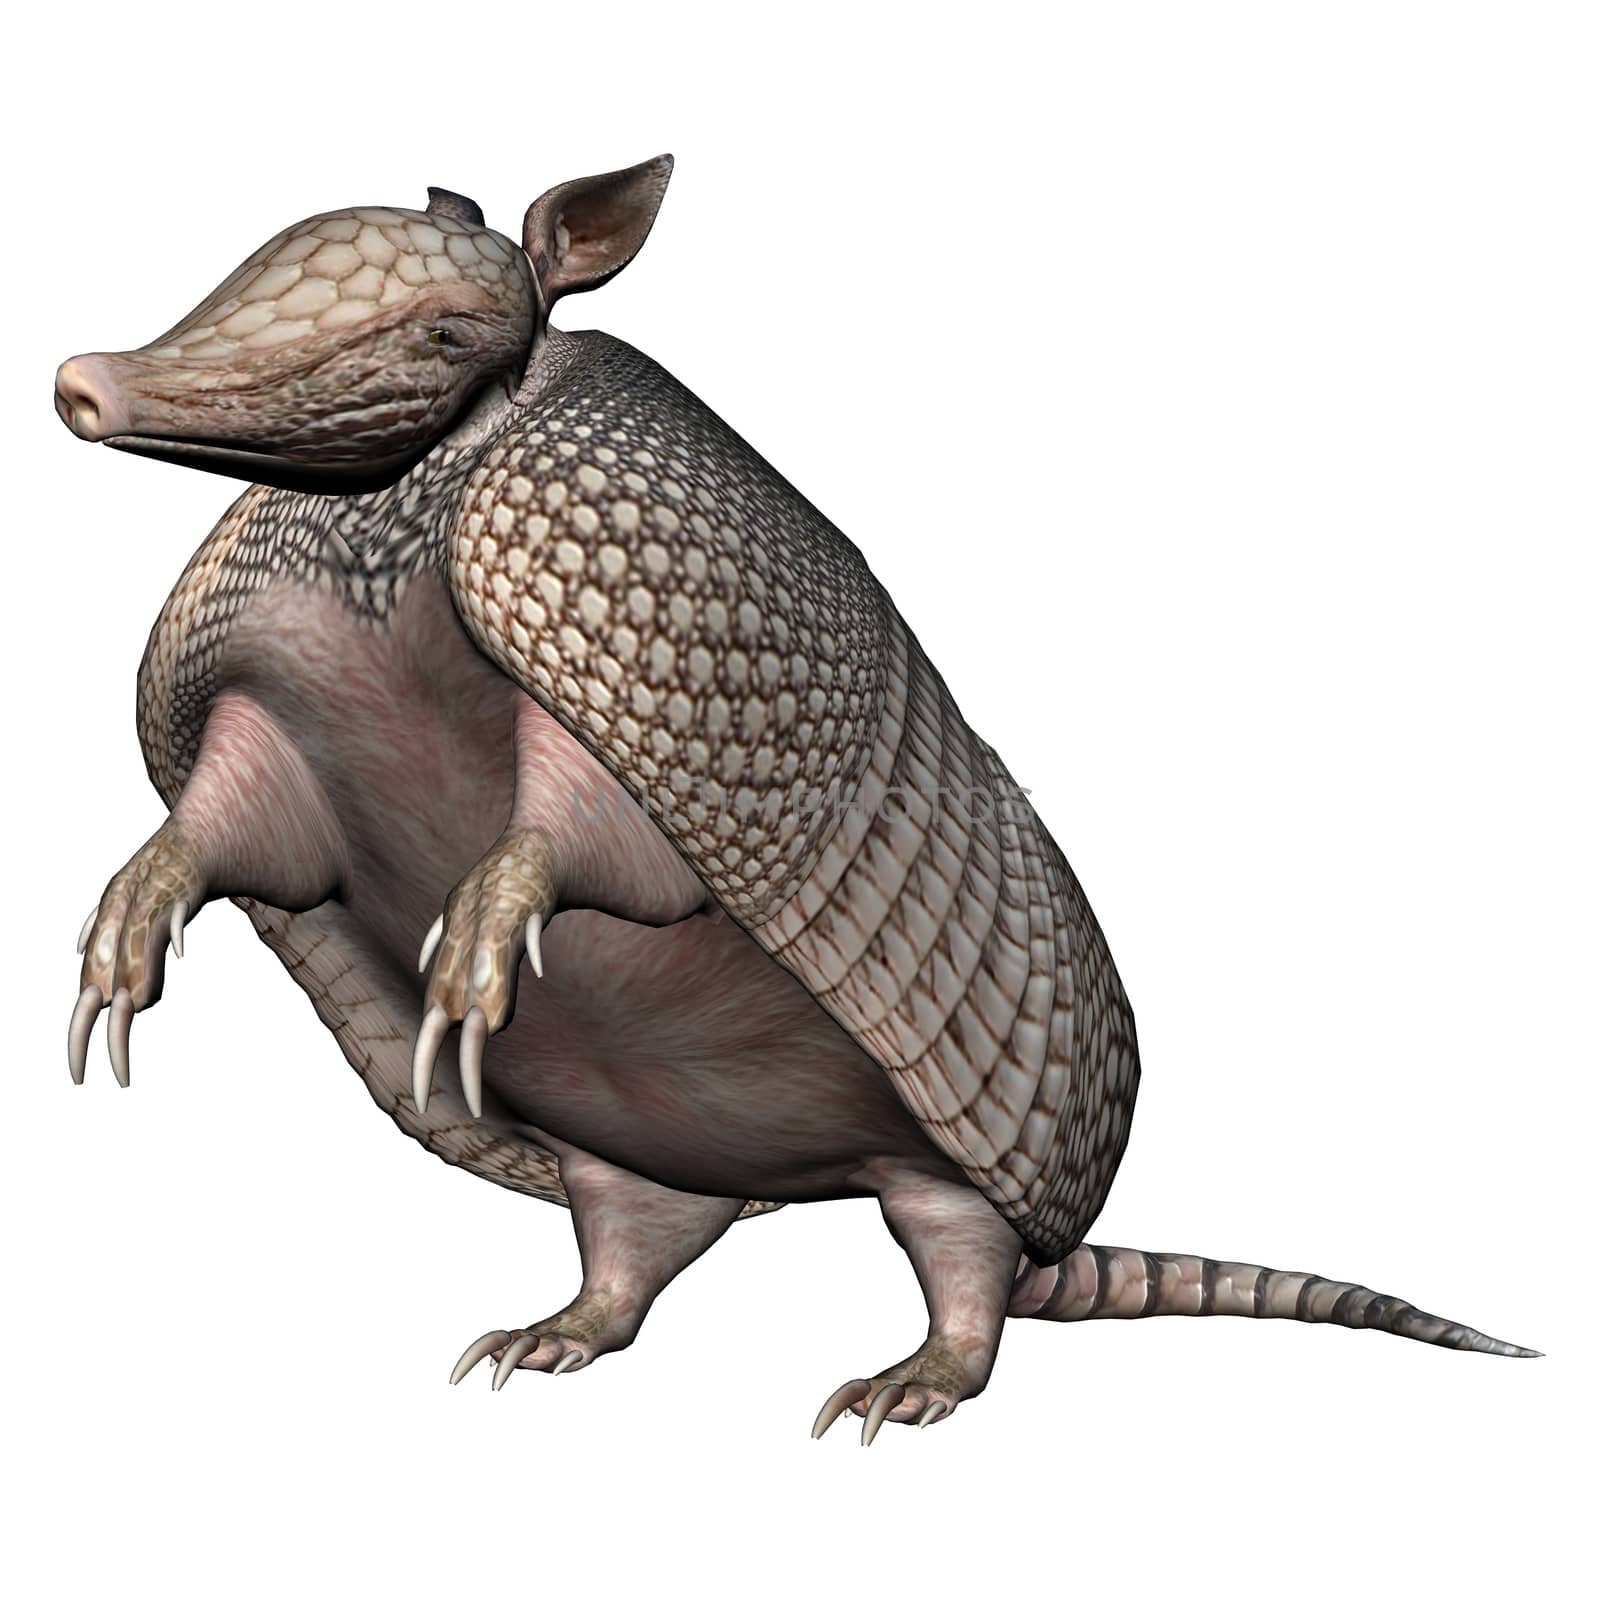 3D digital render of a Armadillos, a New World placental mammal with a leathery armor shell, isolated on white background